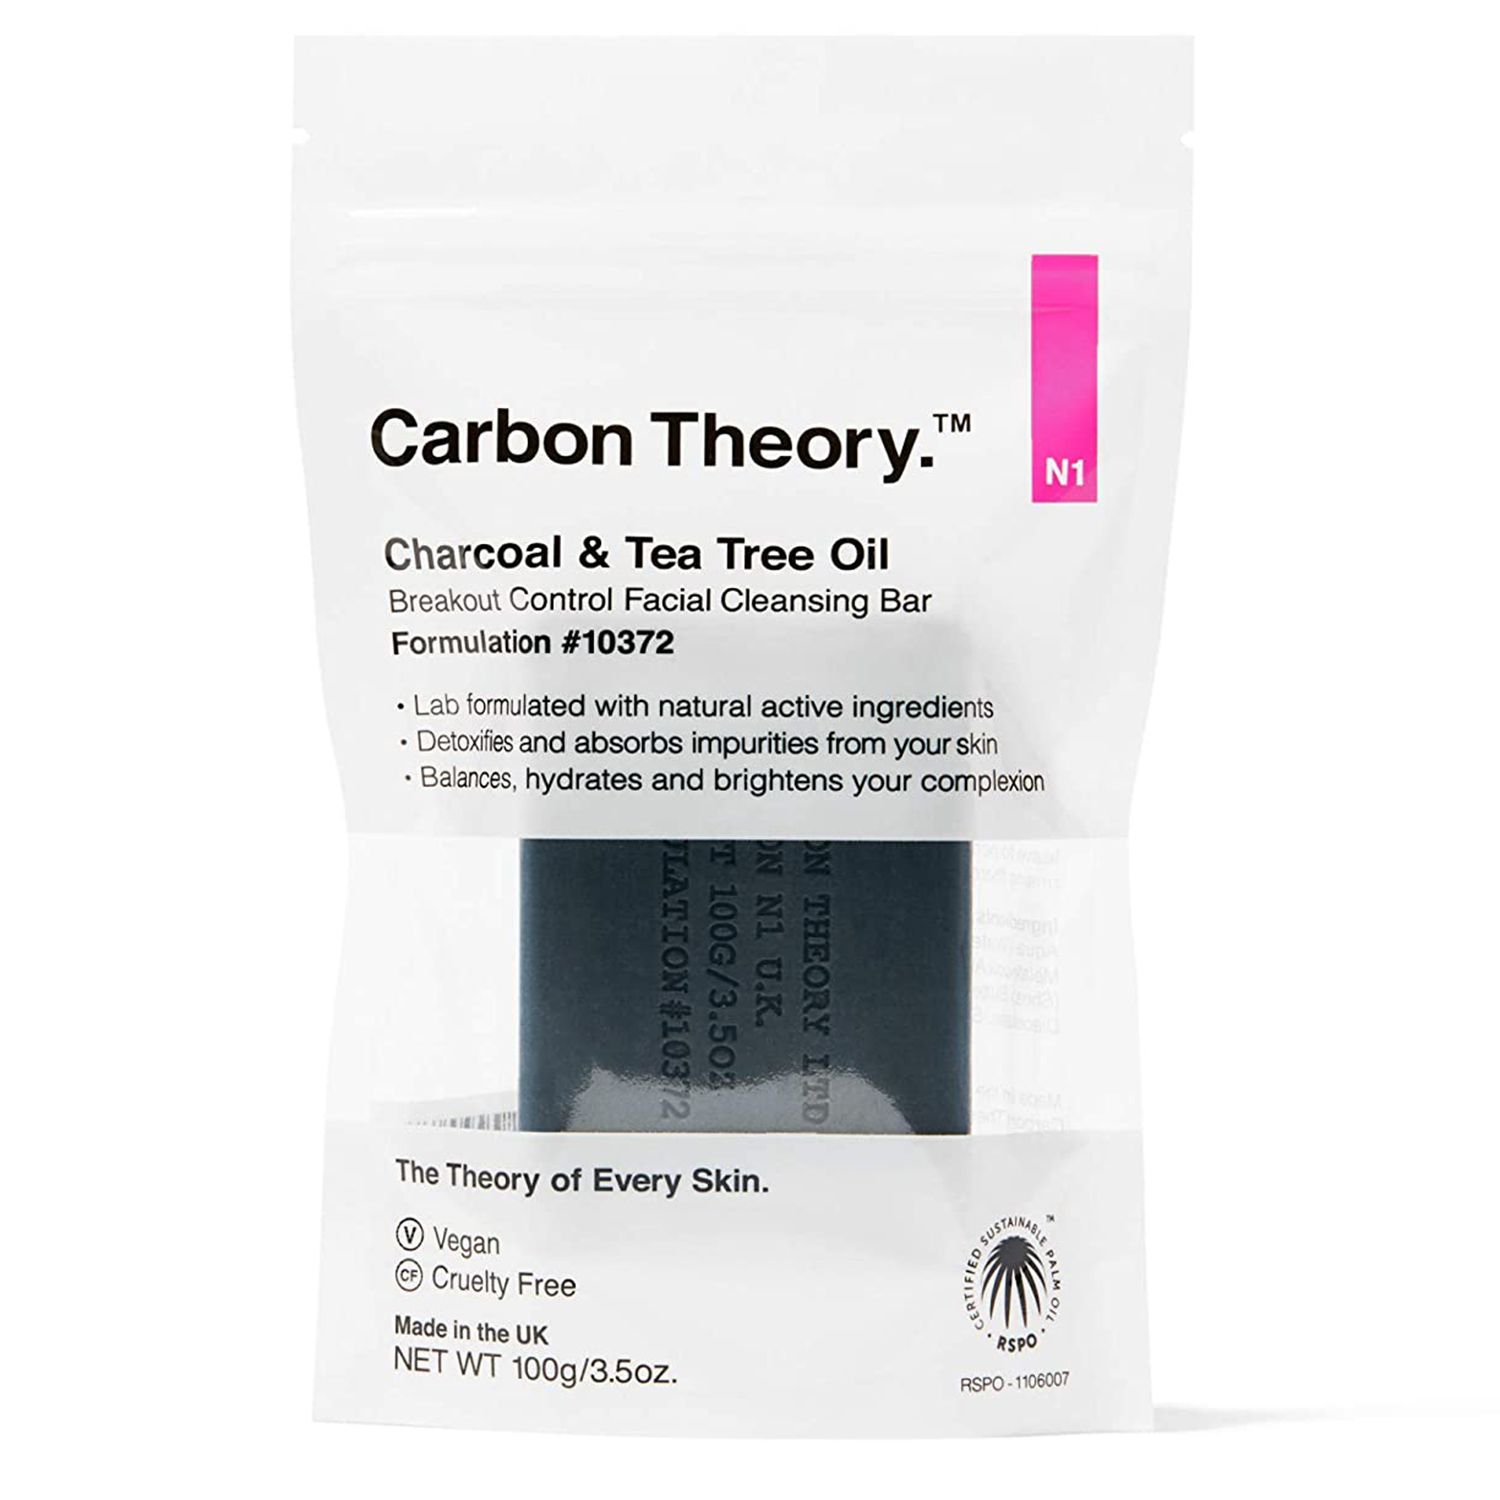 Carbon Theory Charcoal & Tea Tree Oil Facial Cleansing Bar